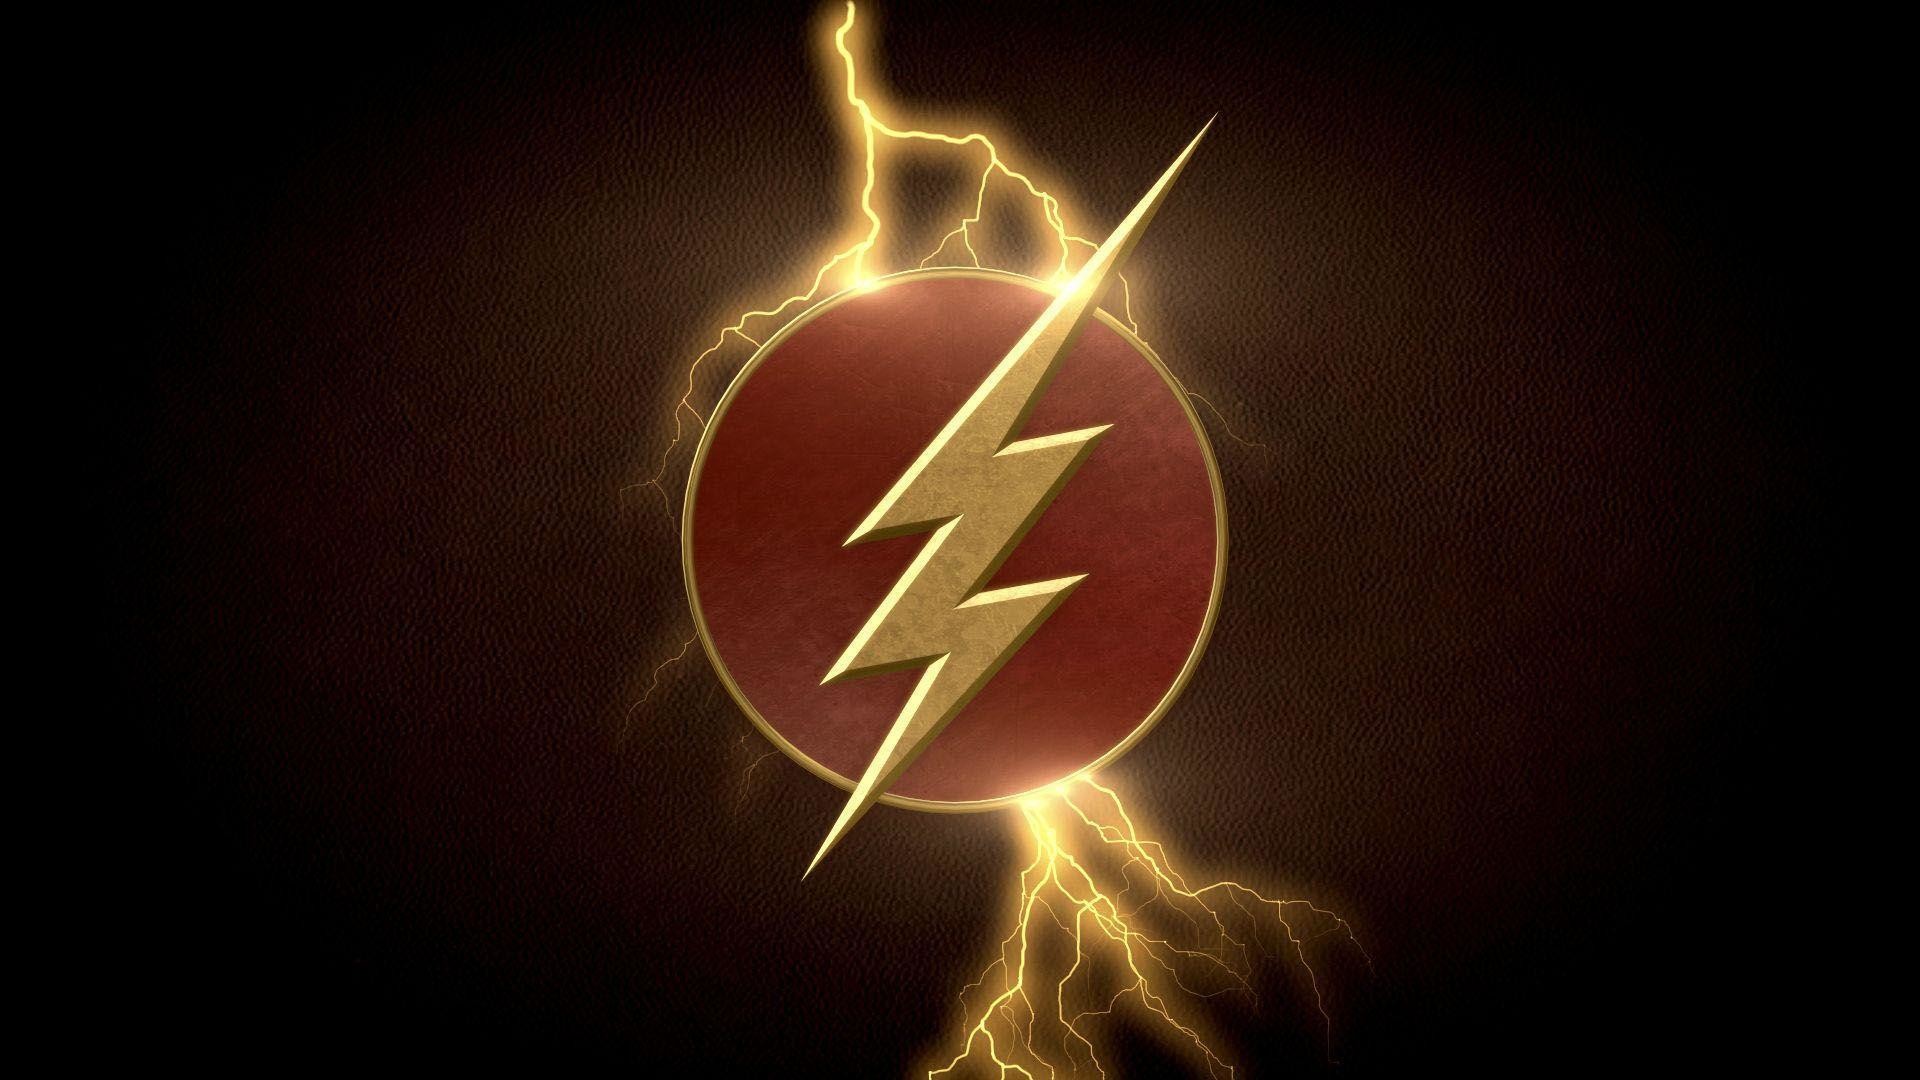 1920x1080 The Flash Symbol Wallpapers Group (74+)